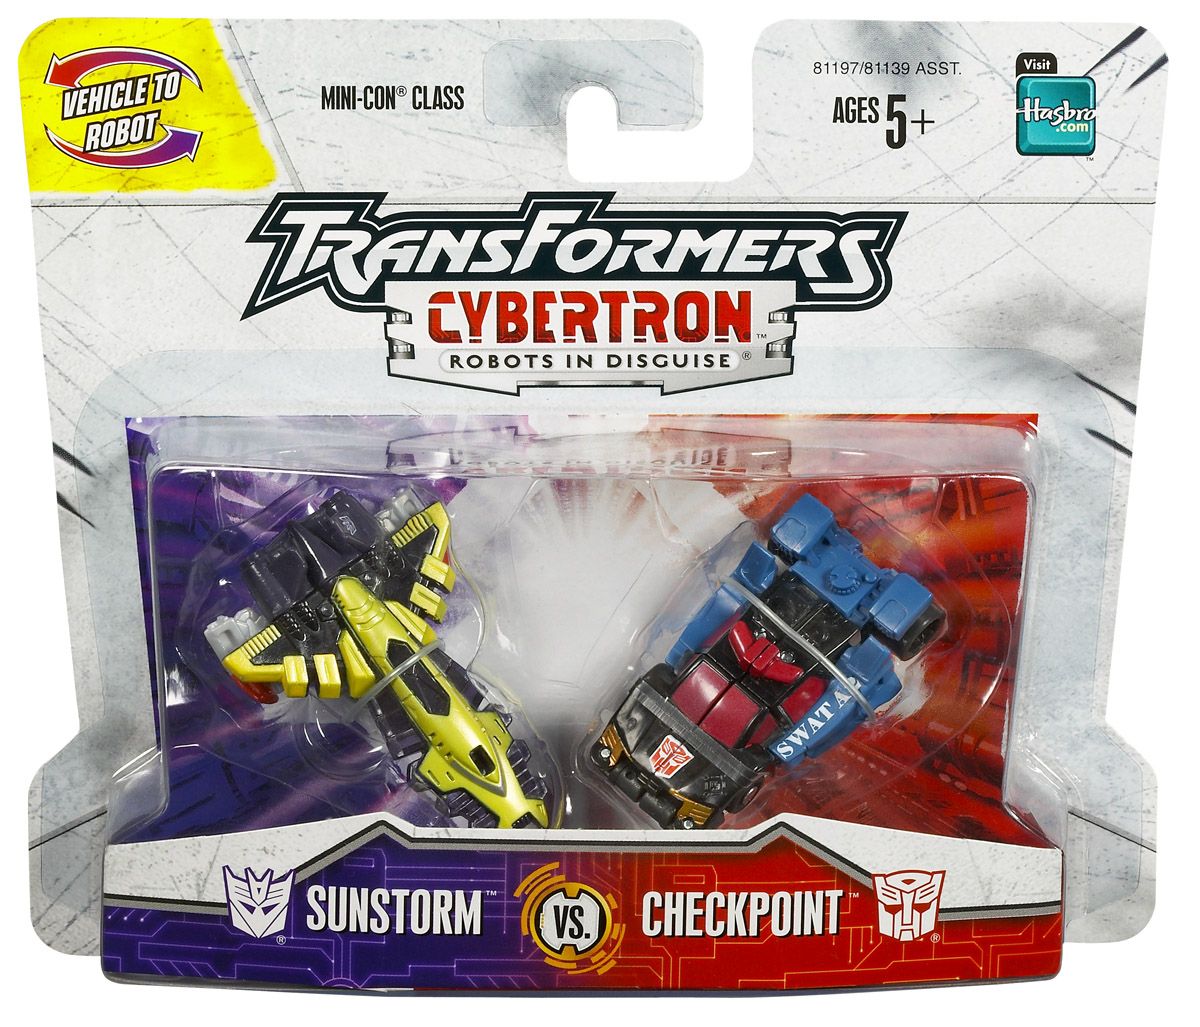 Sunstorm-checkpoint-cybertron-carded.jpg